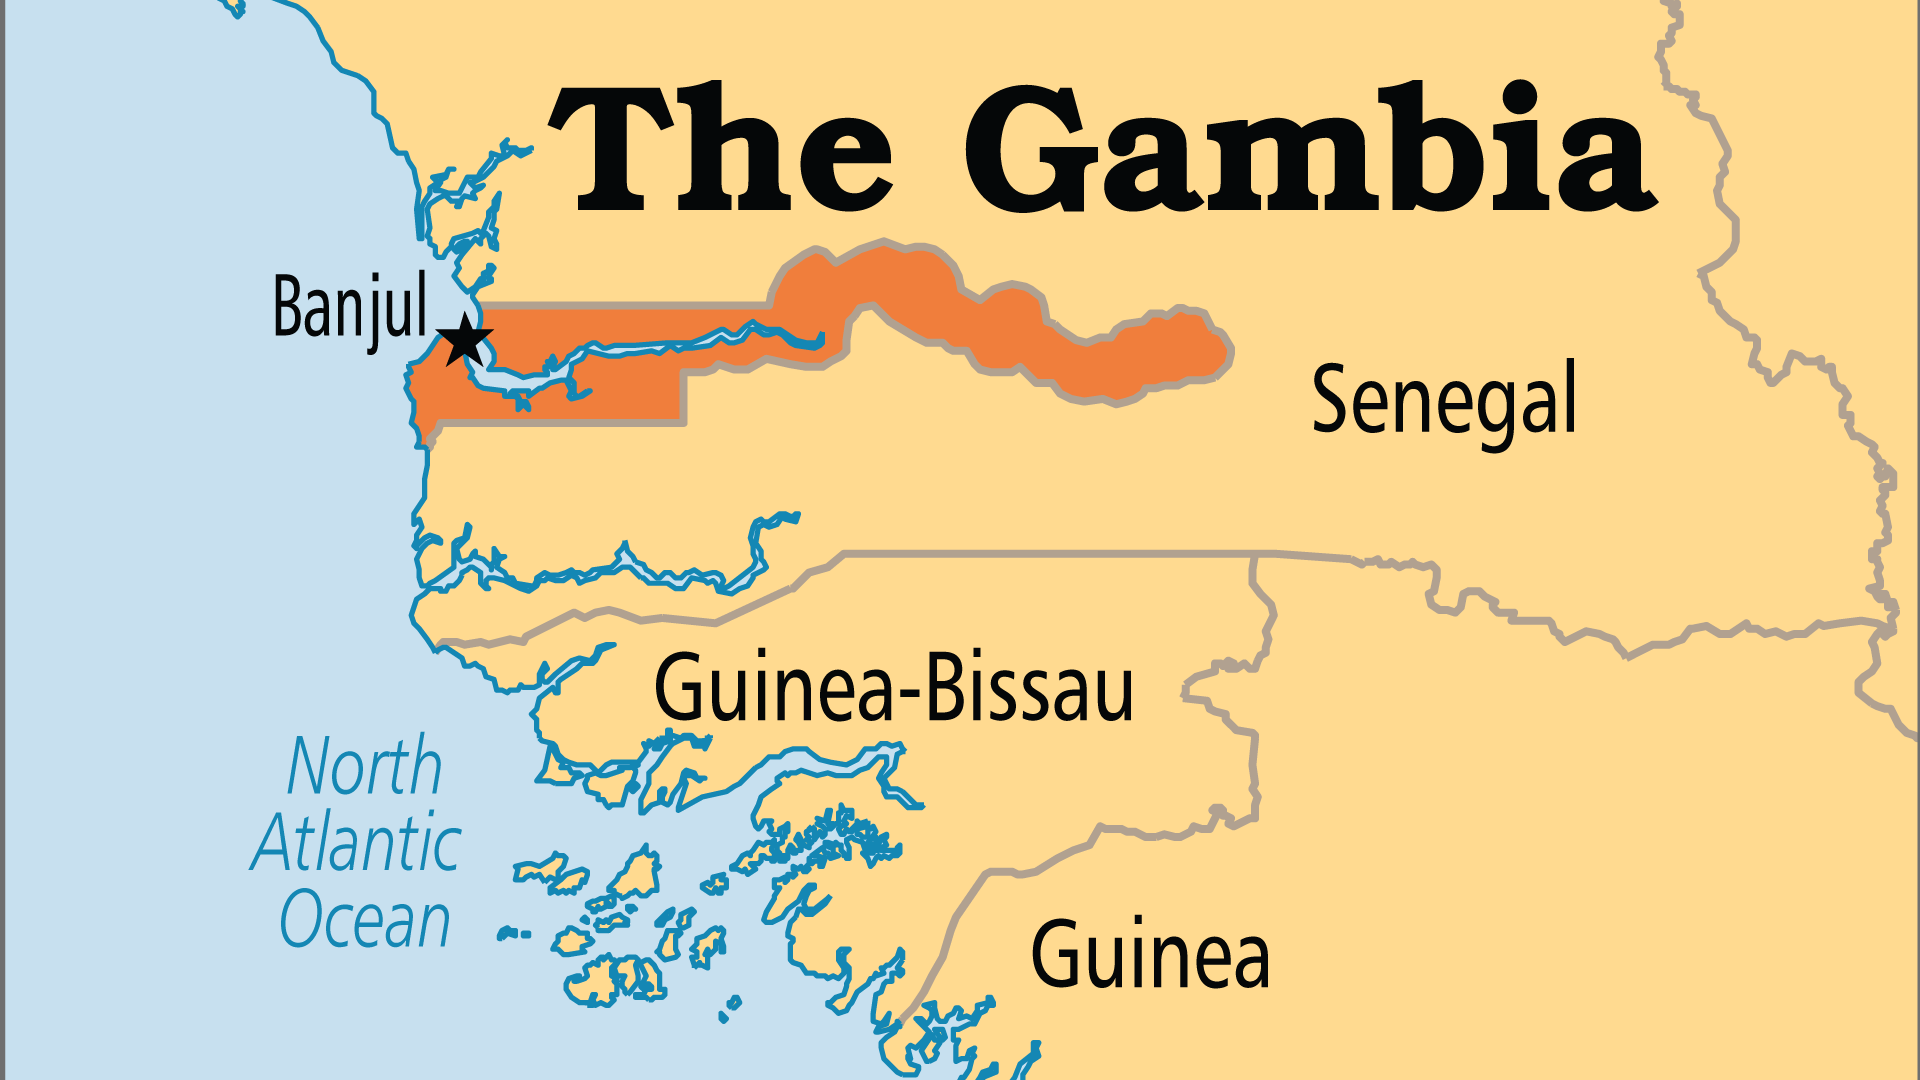 Gambia, The (Operation World)